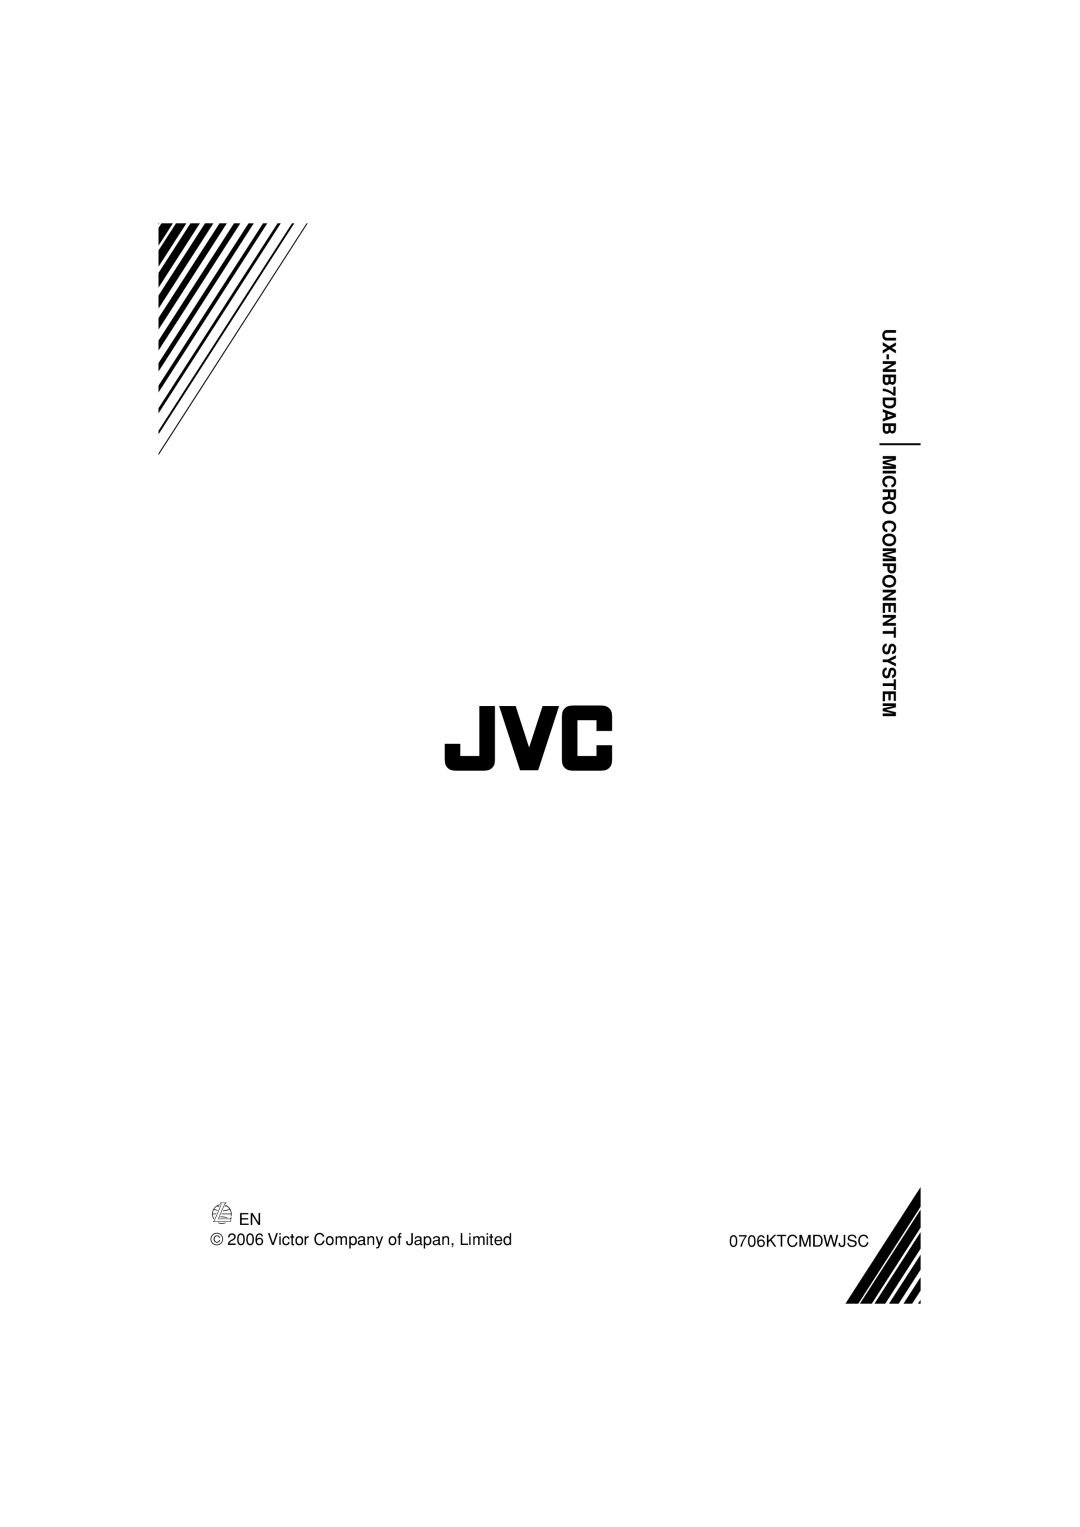 JVC GNT0065-025A manual Victor Company of Japan, Limited, UX-NB7DABMICRO COMPONENT SYSTEM, 0706KTCMDWJSC 